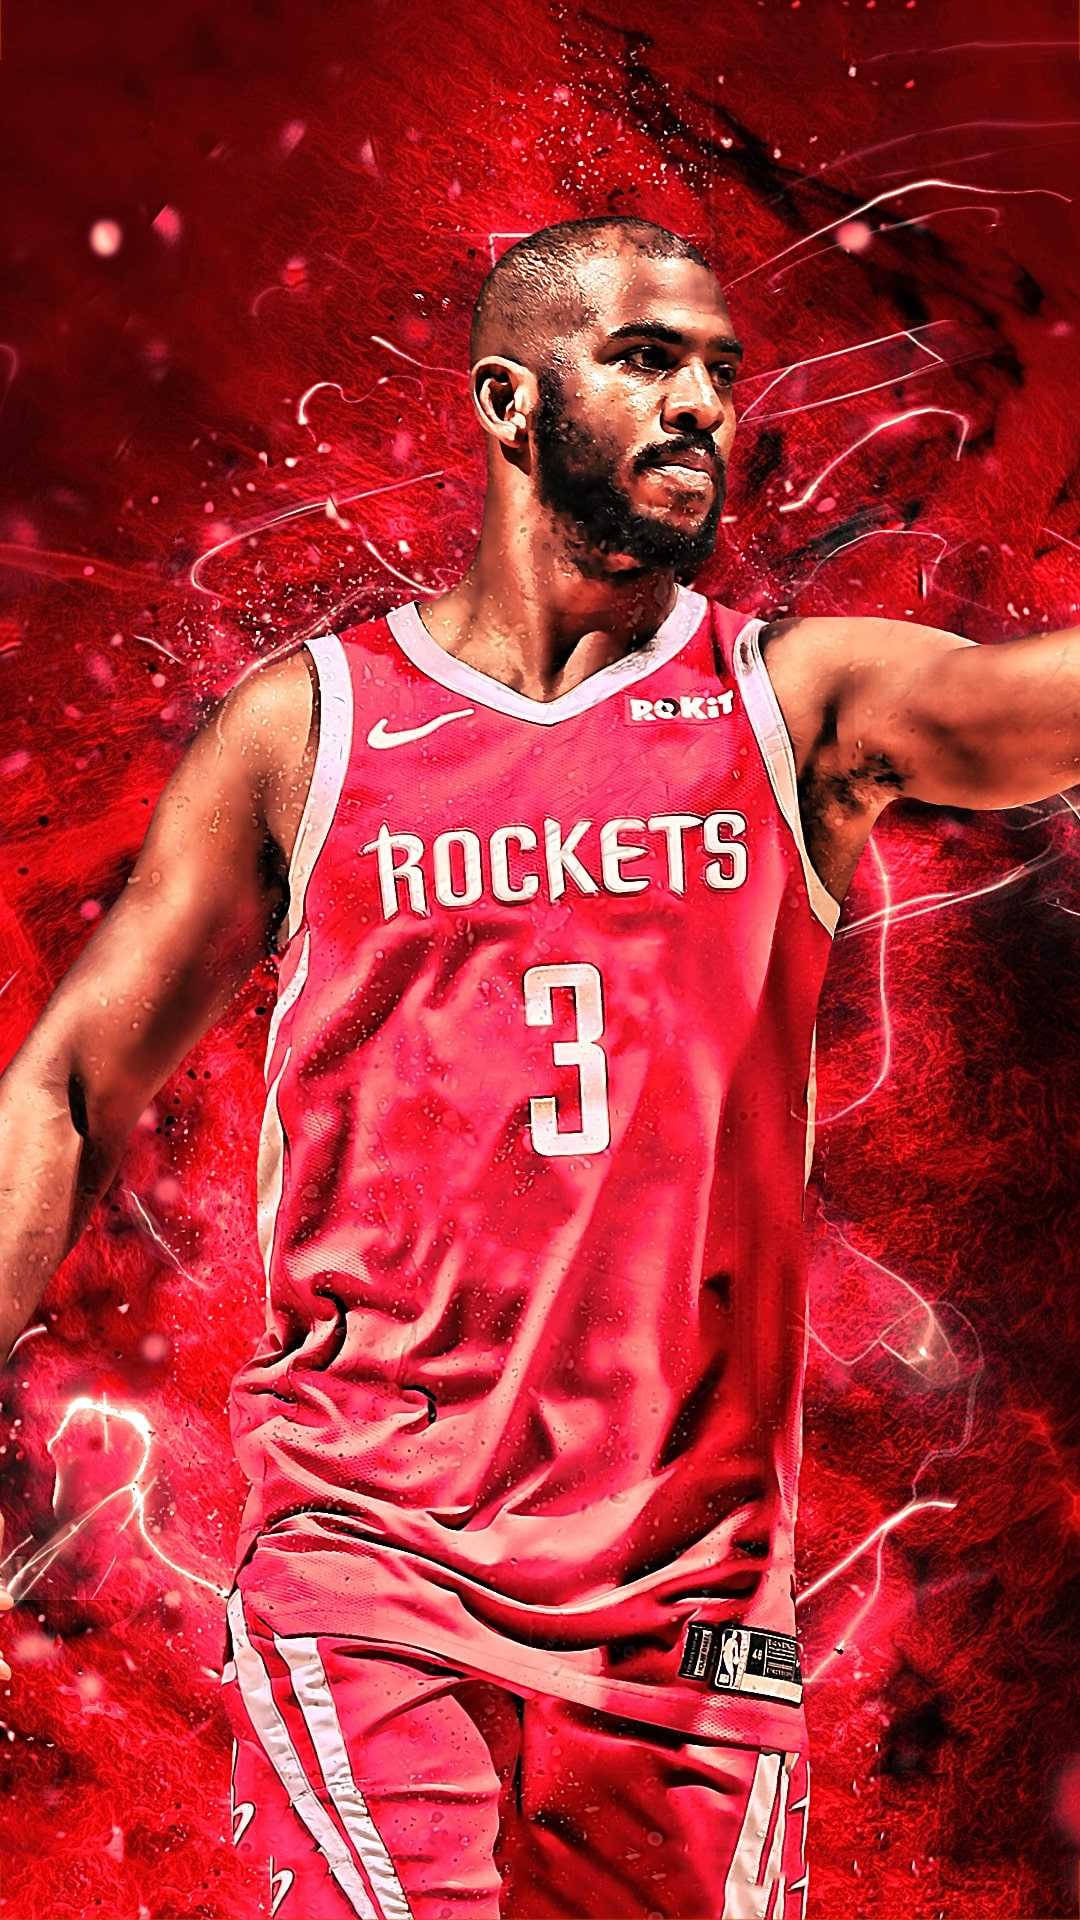 Chris Paul Red Rocket Jersey Background